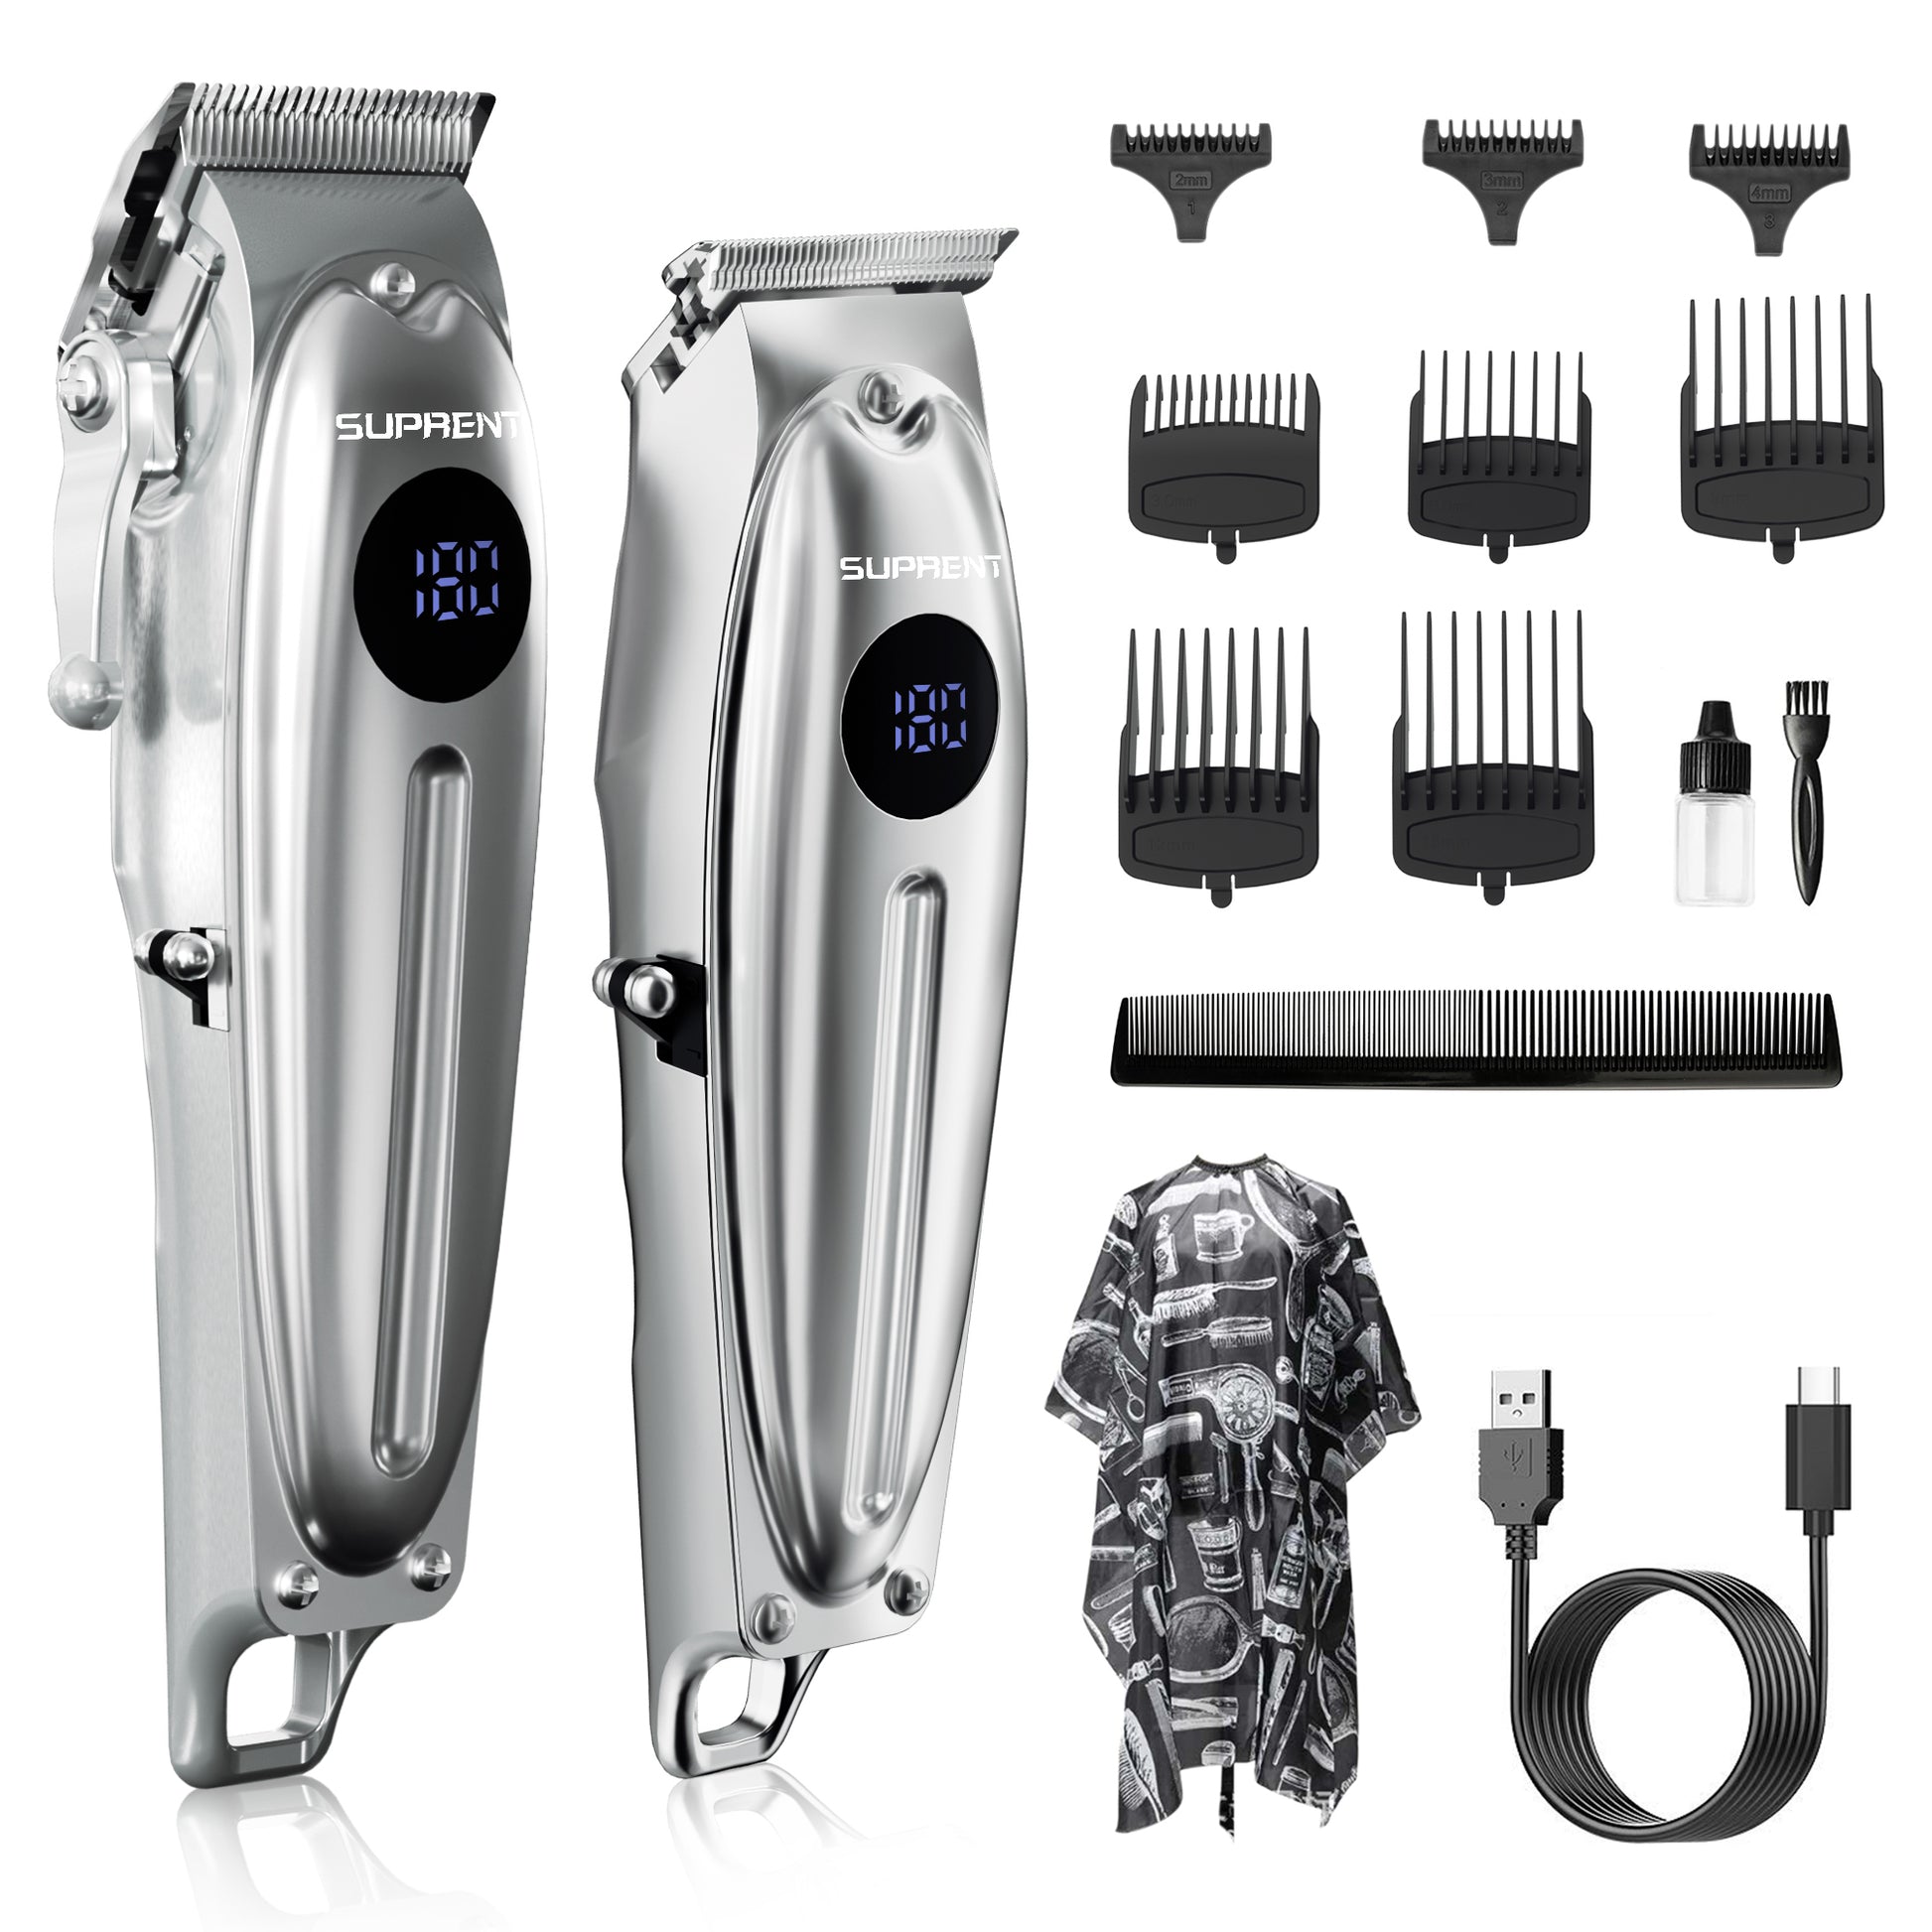 SUPRENT HC715SX Home Hair Clippers